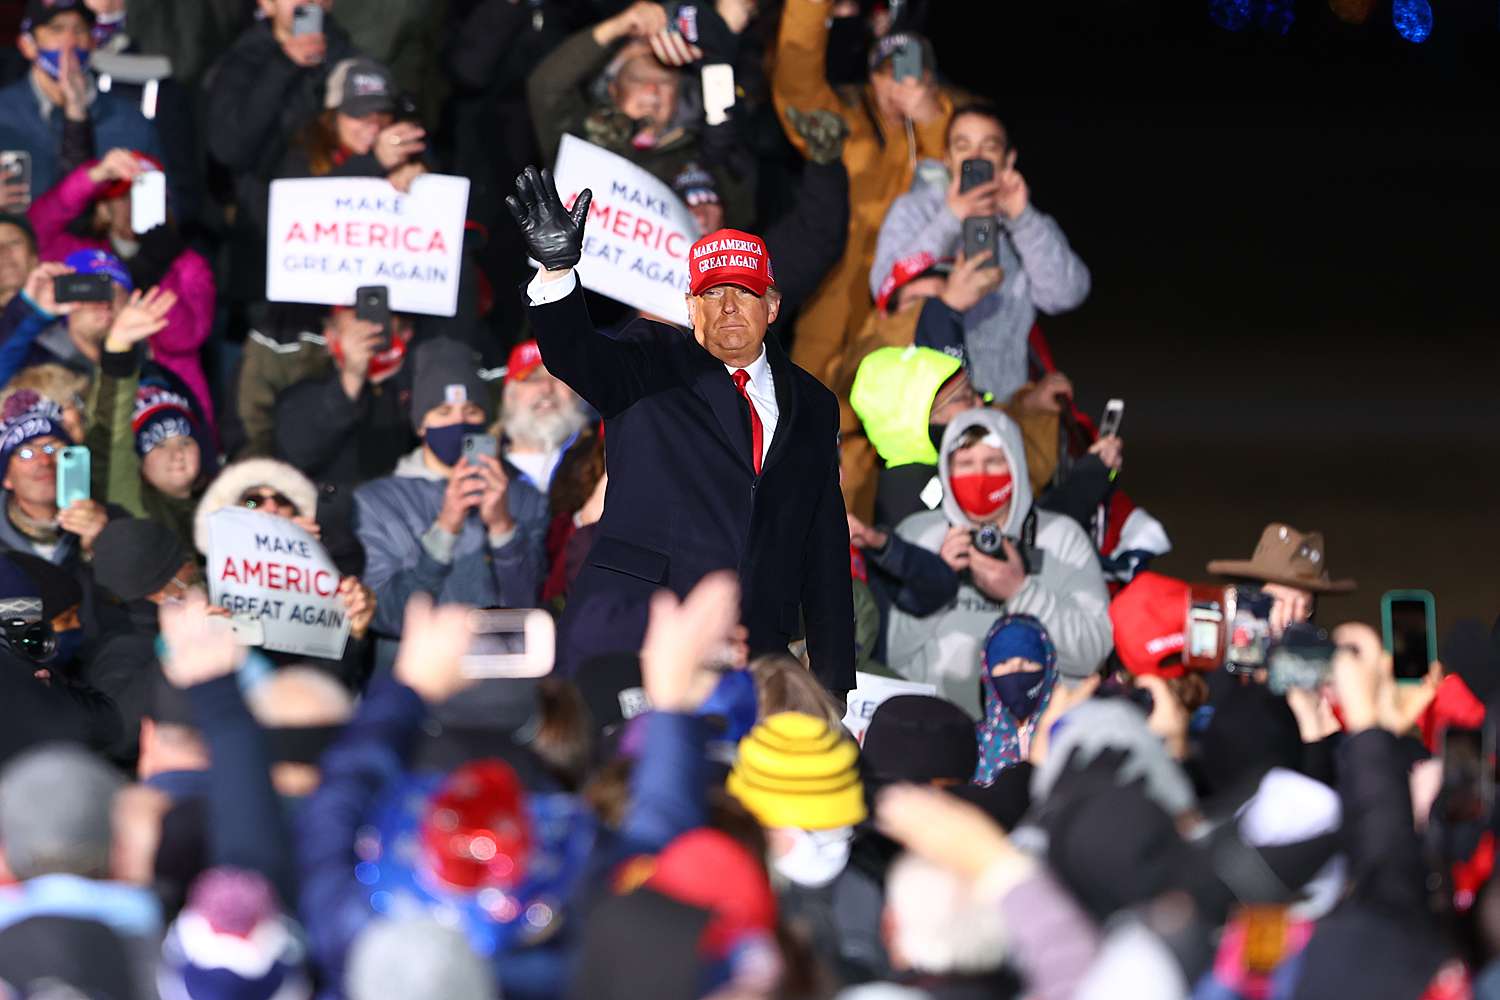 US President Donald Trump waves to supporters during a campaign rally on November 2, 2020 in Traverse City, Michigan